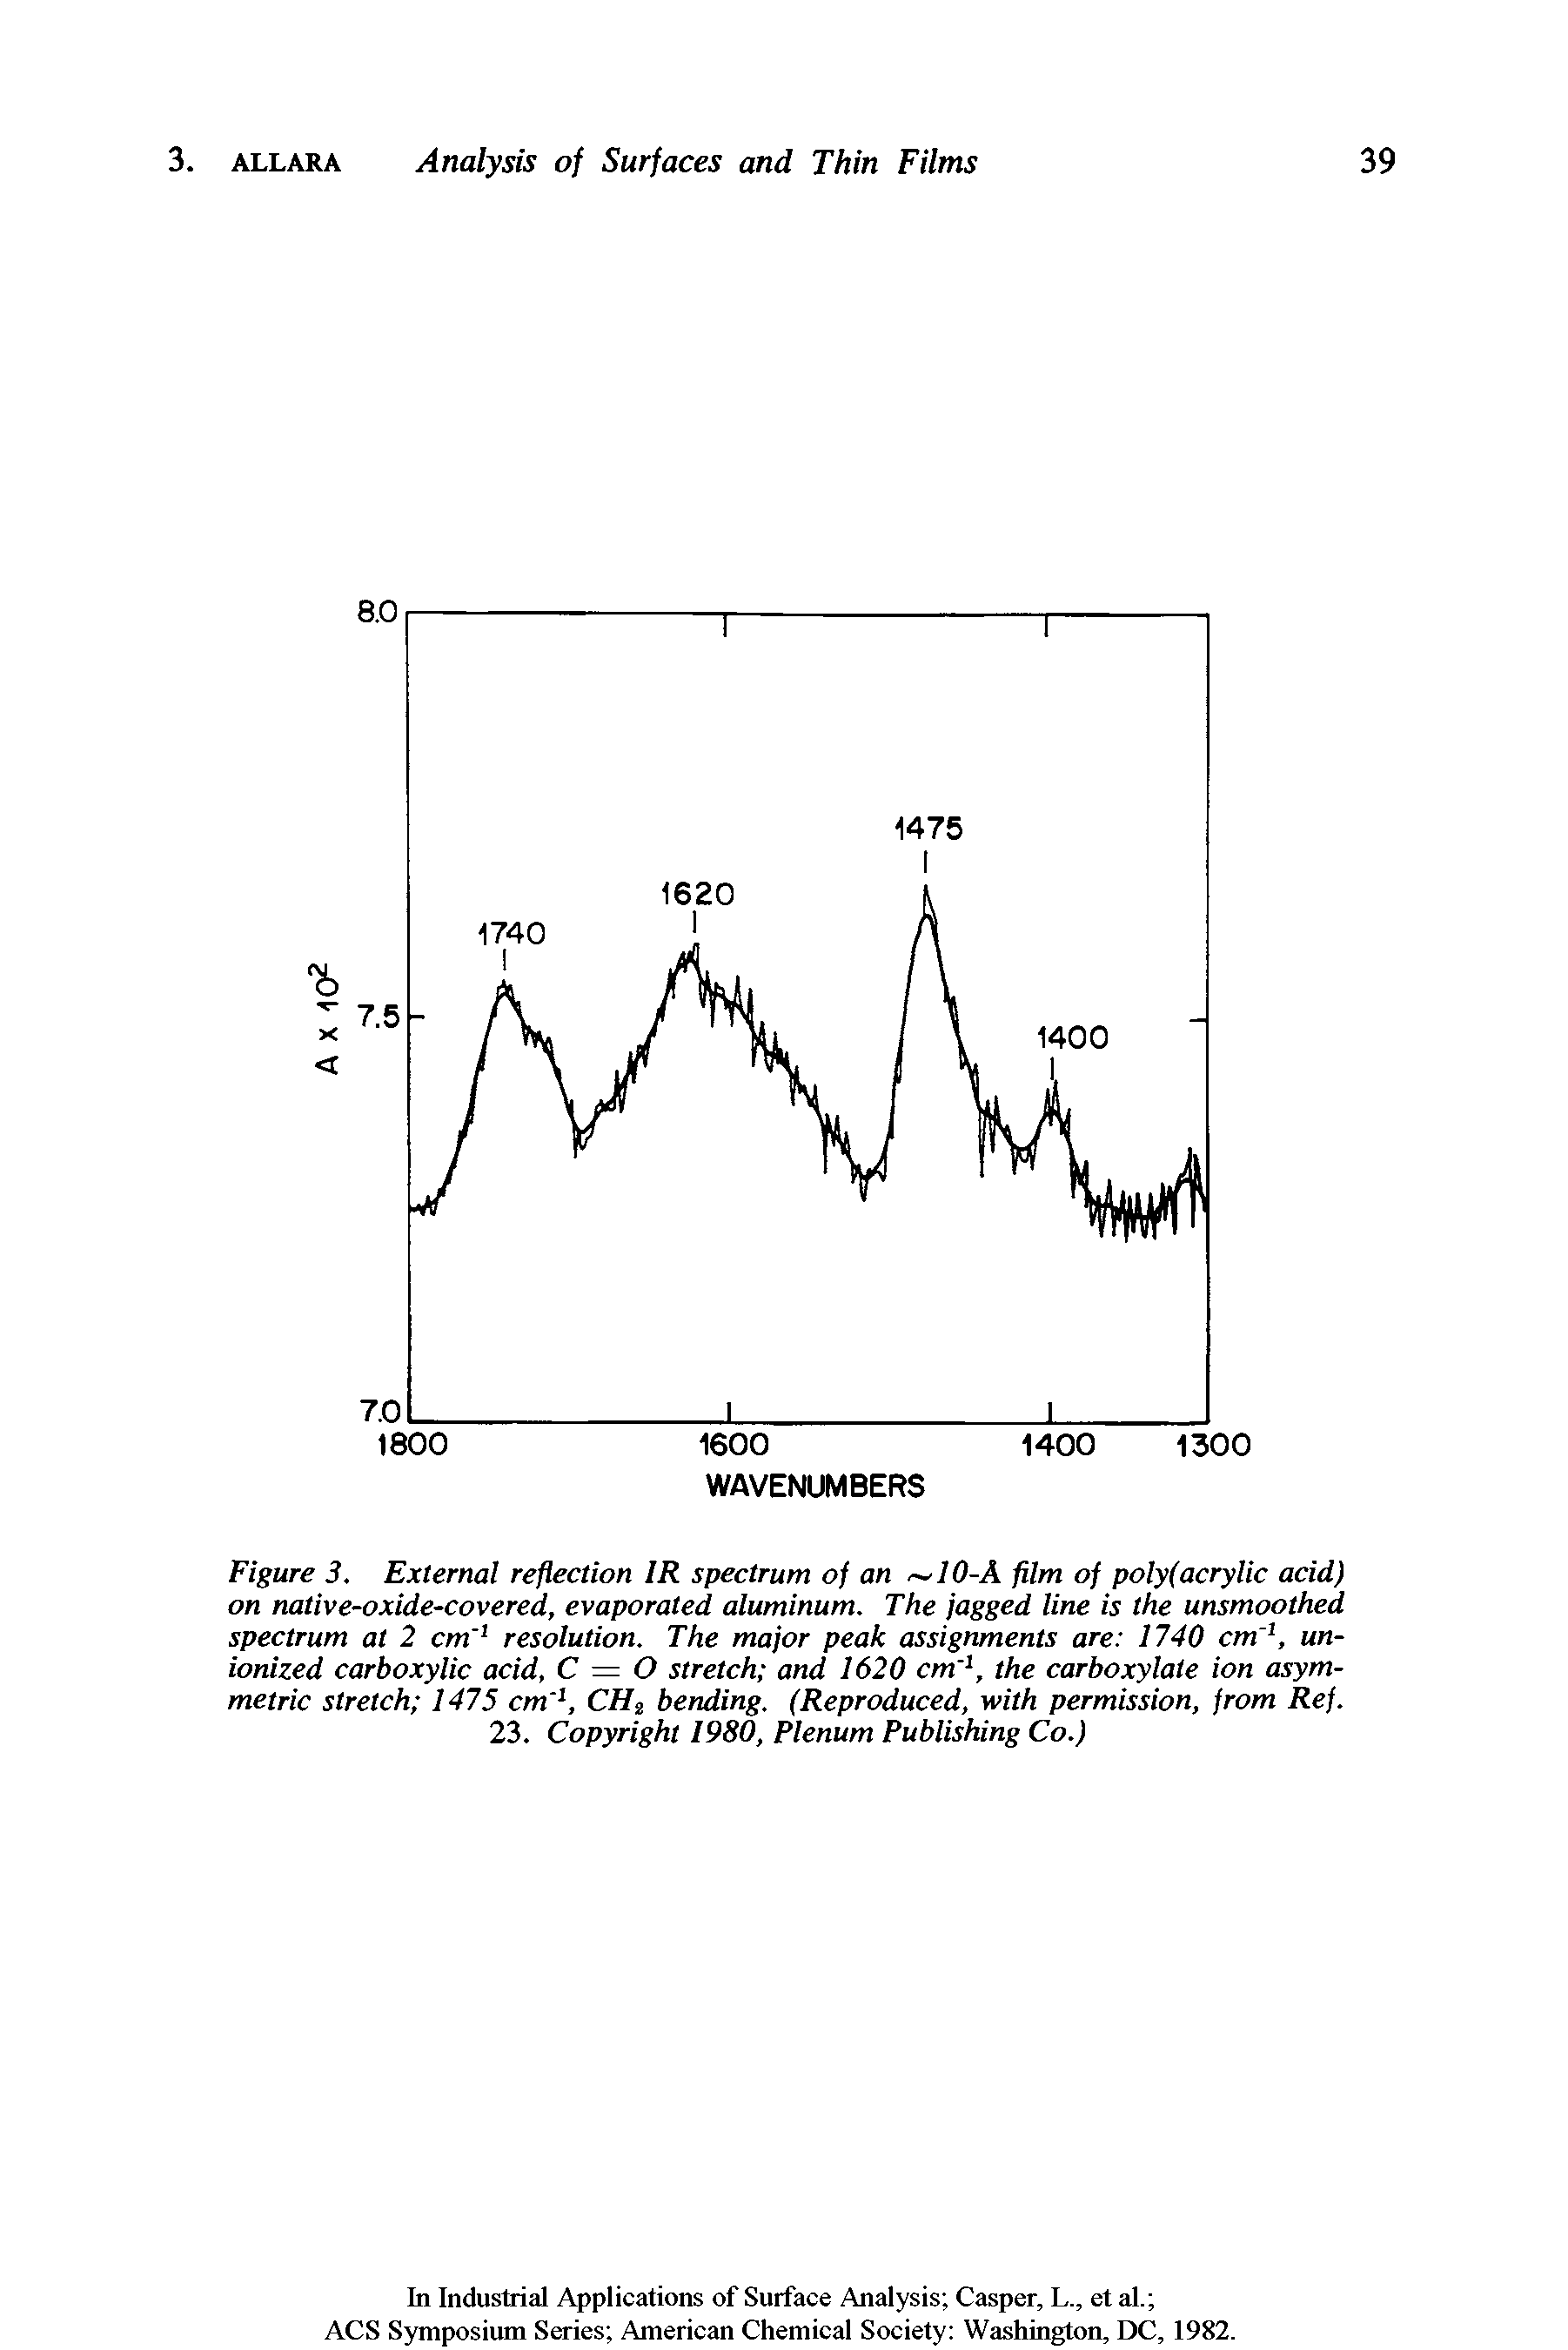 Figure 3. External reflection IR spectrum of an 10-A film of poly (acrylic acid) on native-oxide-covered, evaporated aluminum. The jagged line is the unsmoothed spectrum at 2 cm 1 resolution. The major peak assignments are 1740 cm 1, unionized carboxylic acid, C = O stretch and 1620 cm 1, the carboxylate ion asymmetric stretch 1475 cm 1, CH2 bending. (Reproduced, with permission, from Ref.